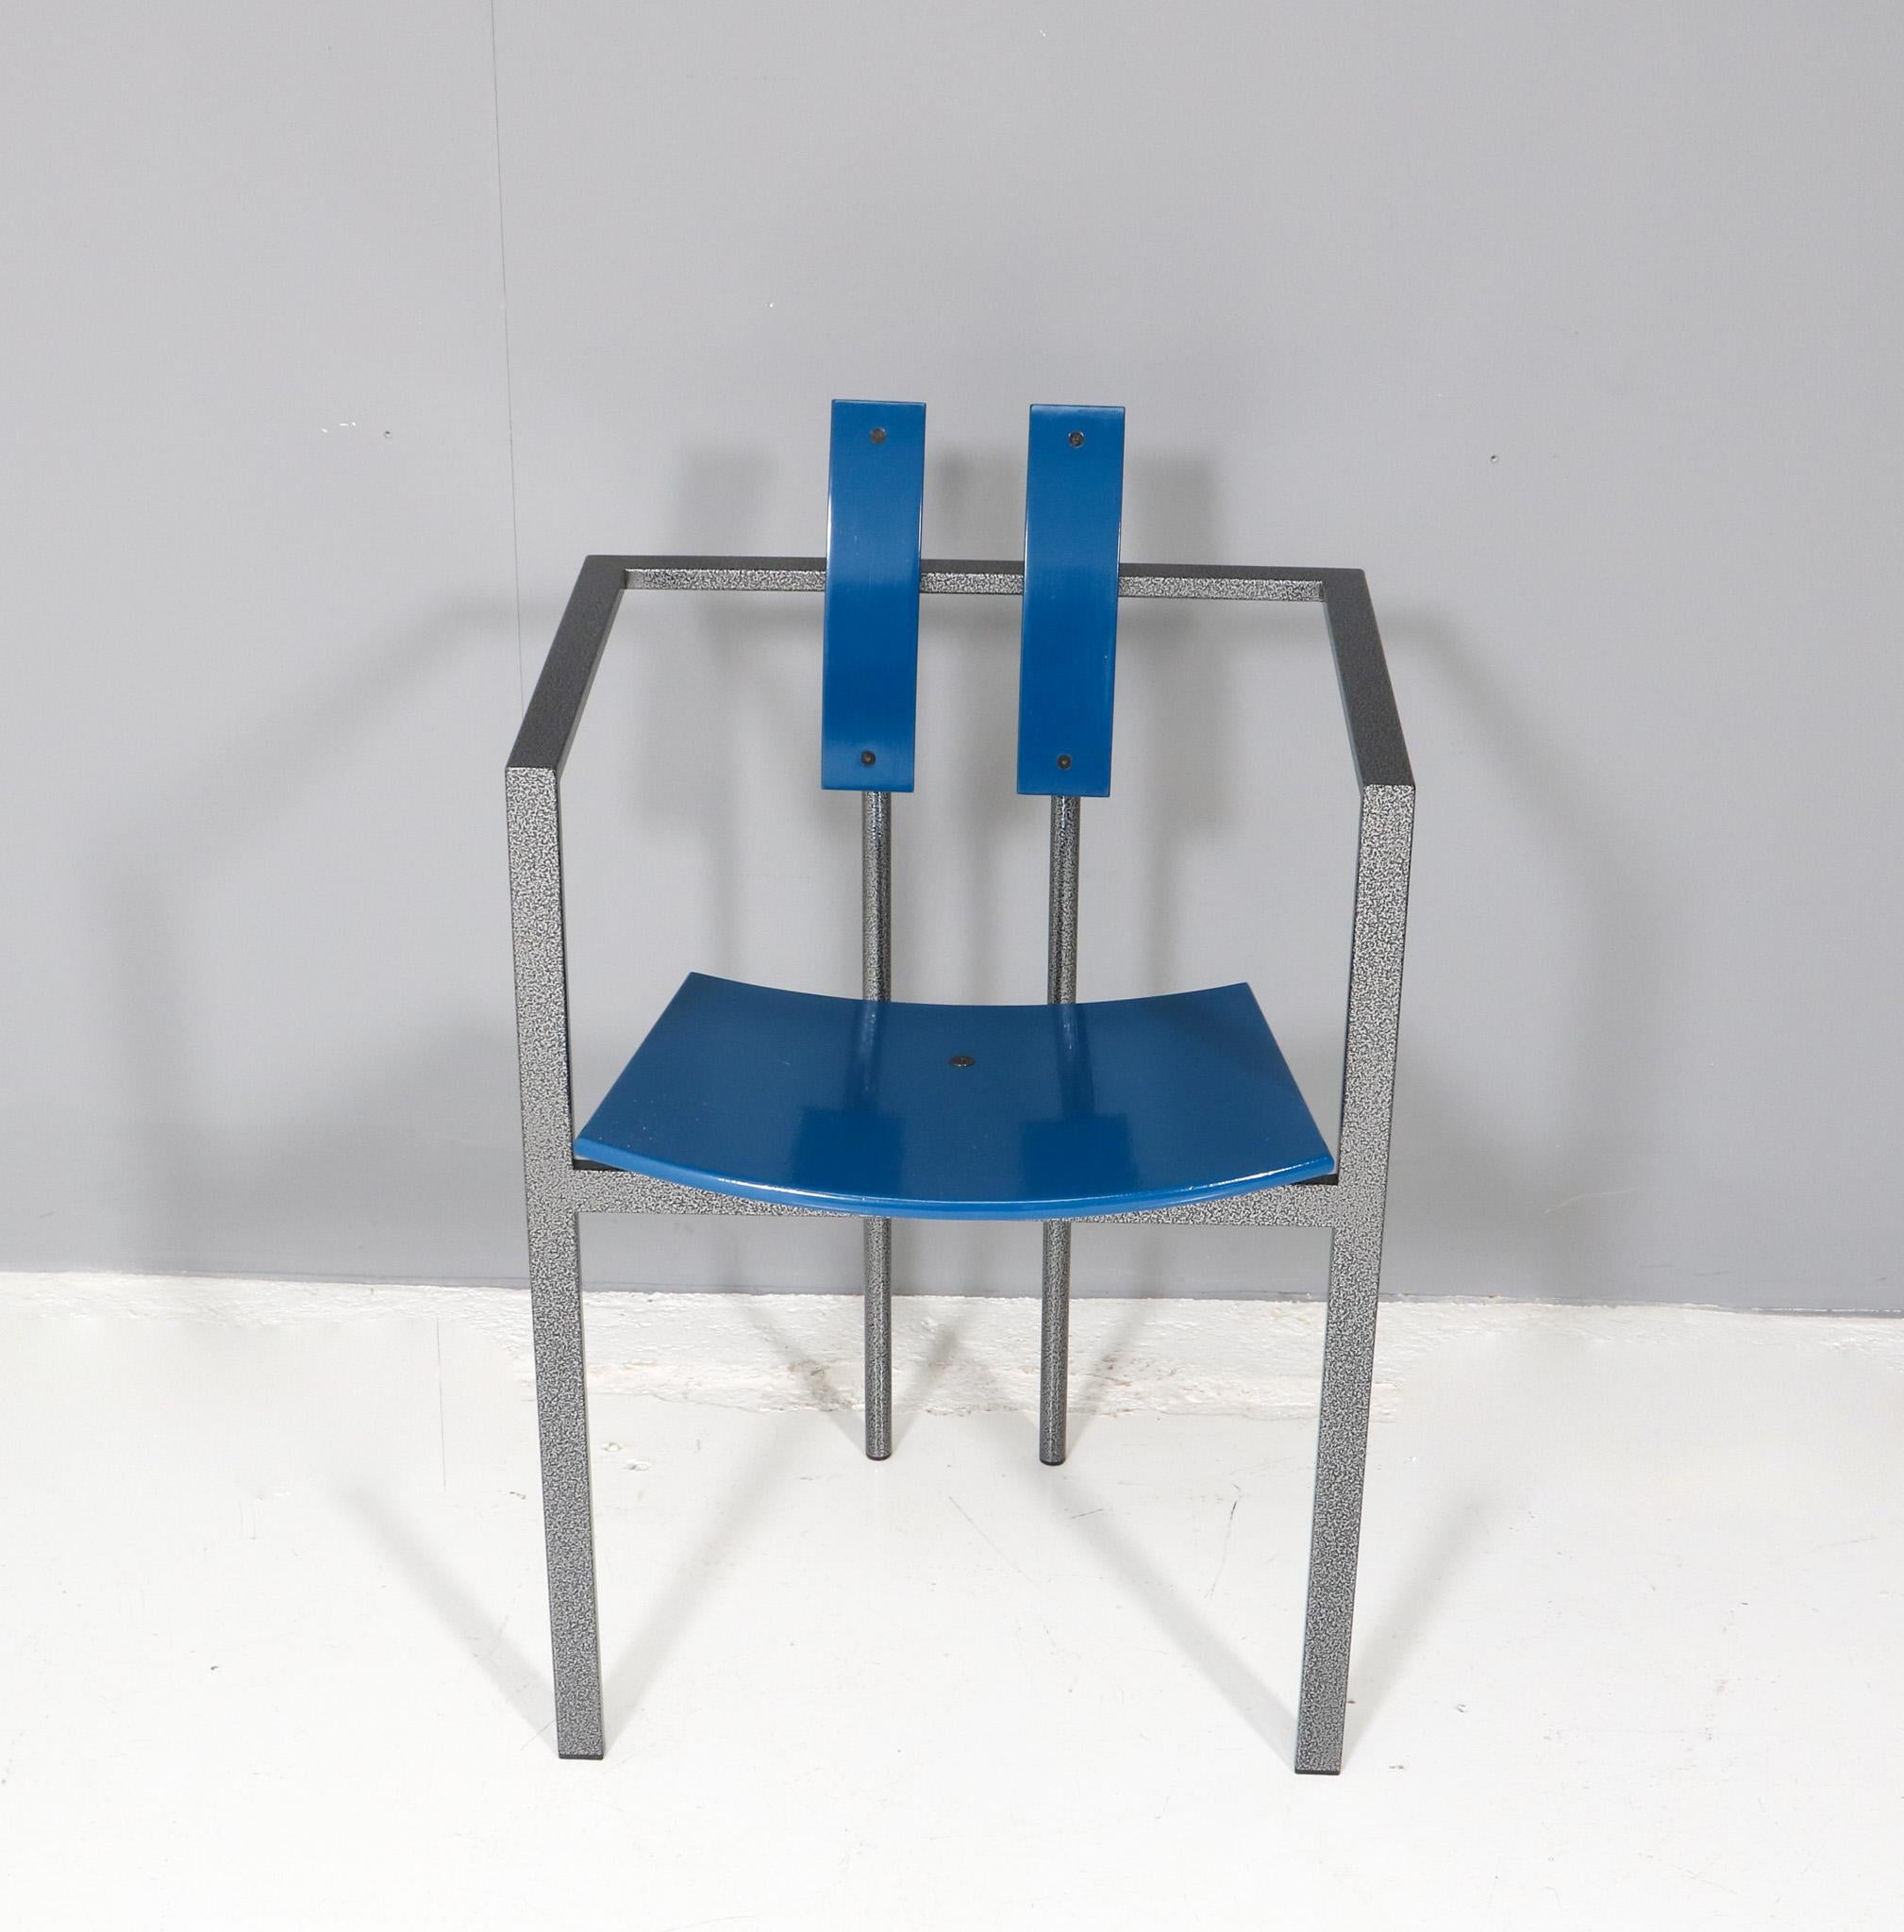 Stunning and rare Post-Modern Trix armchair.
Design by Karl Friedrich Förster for KFF.
Striking German design in the style of Memphis from the 1980s.
Original patinated steel frame with blue lacquered plywood armrests and backrests.
Rare, because of